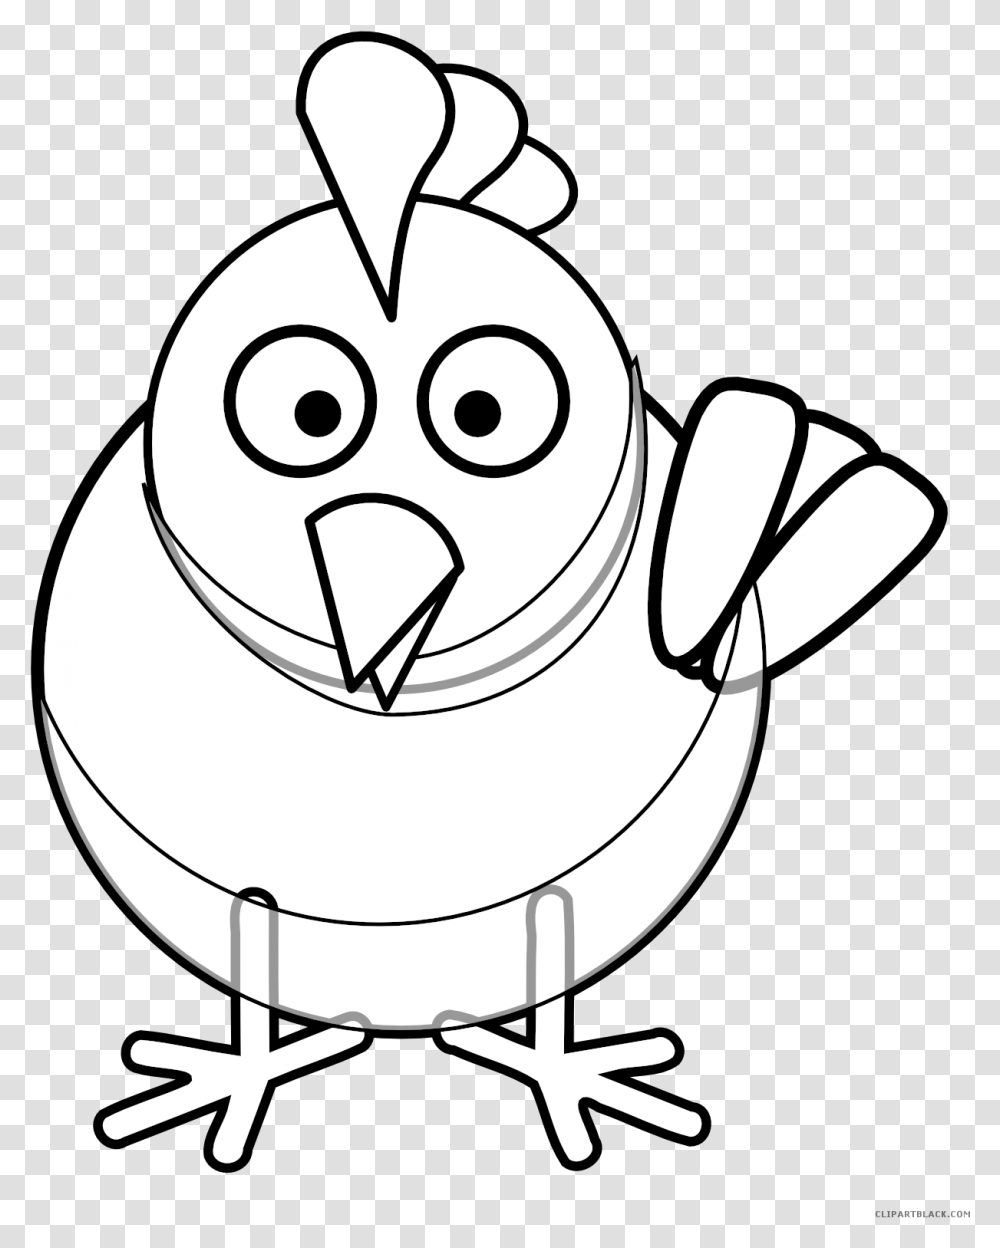 Black And White Turkey Mali Pilii Cartoon Chicken Bird Clip Free Svg, Drawing, Doodle, Snowman, Outdoors Transparent Png